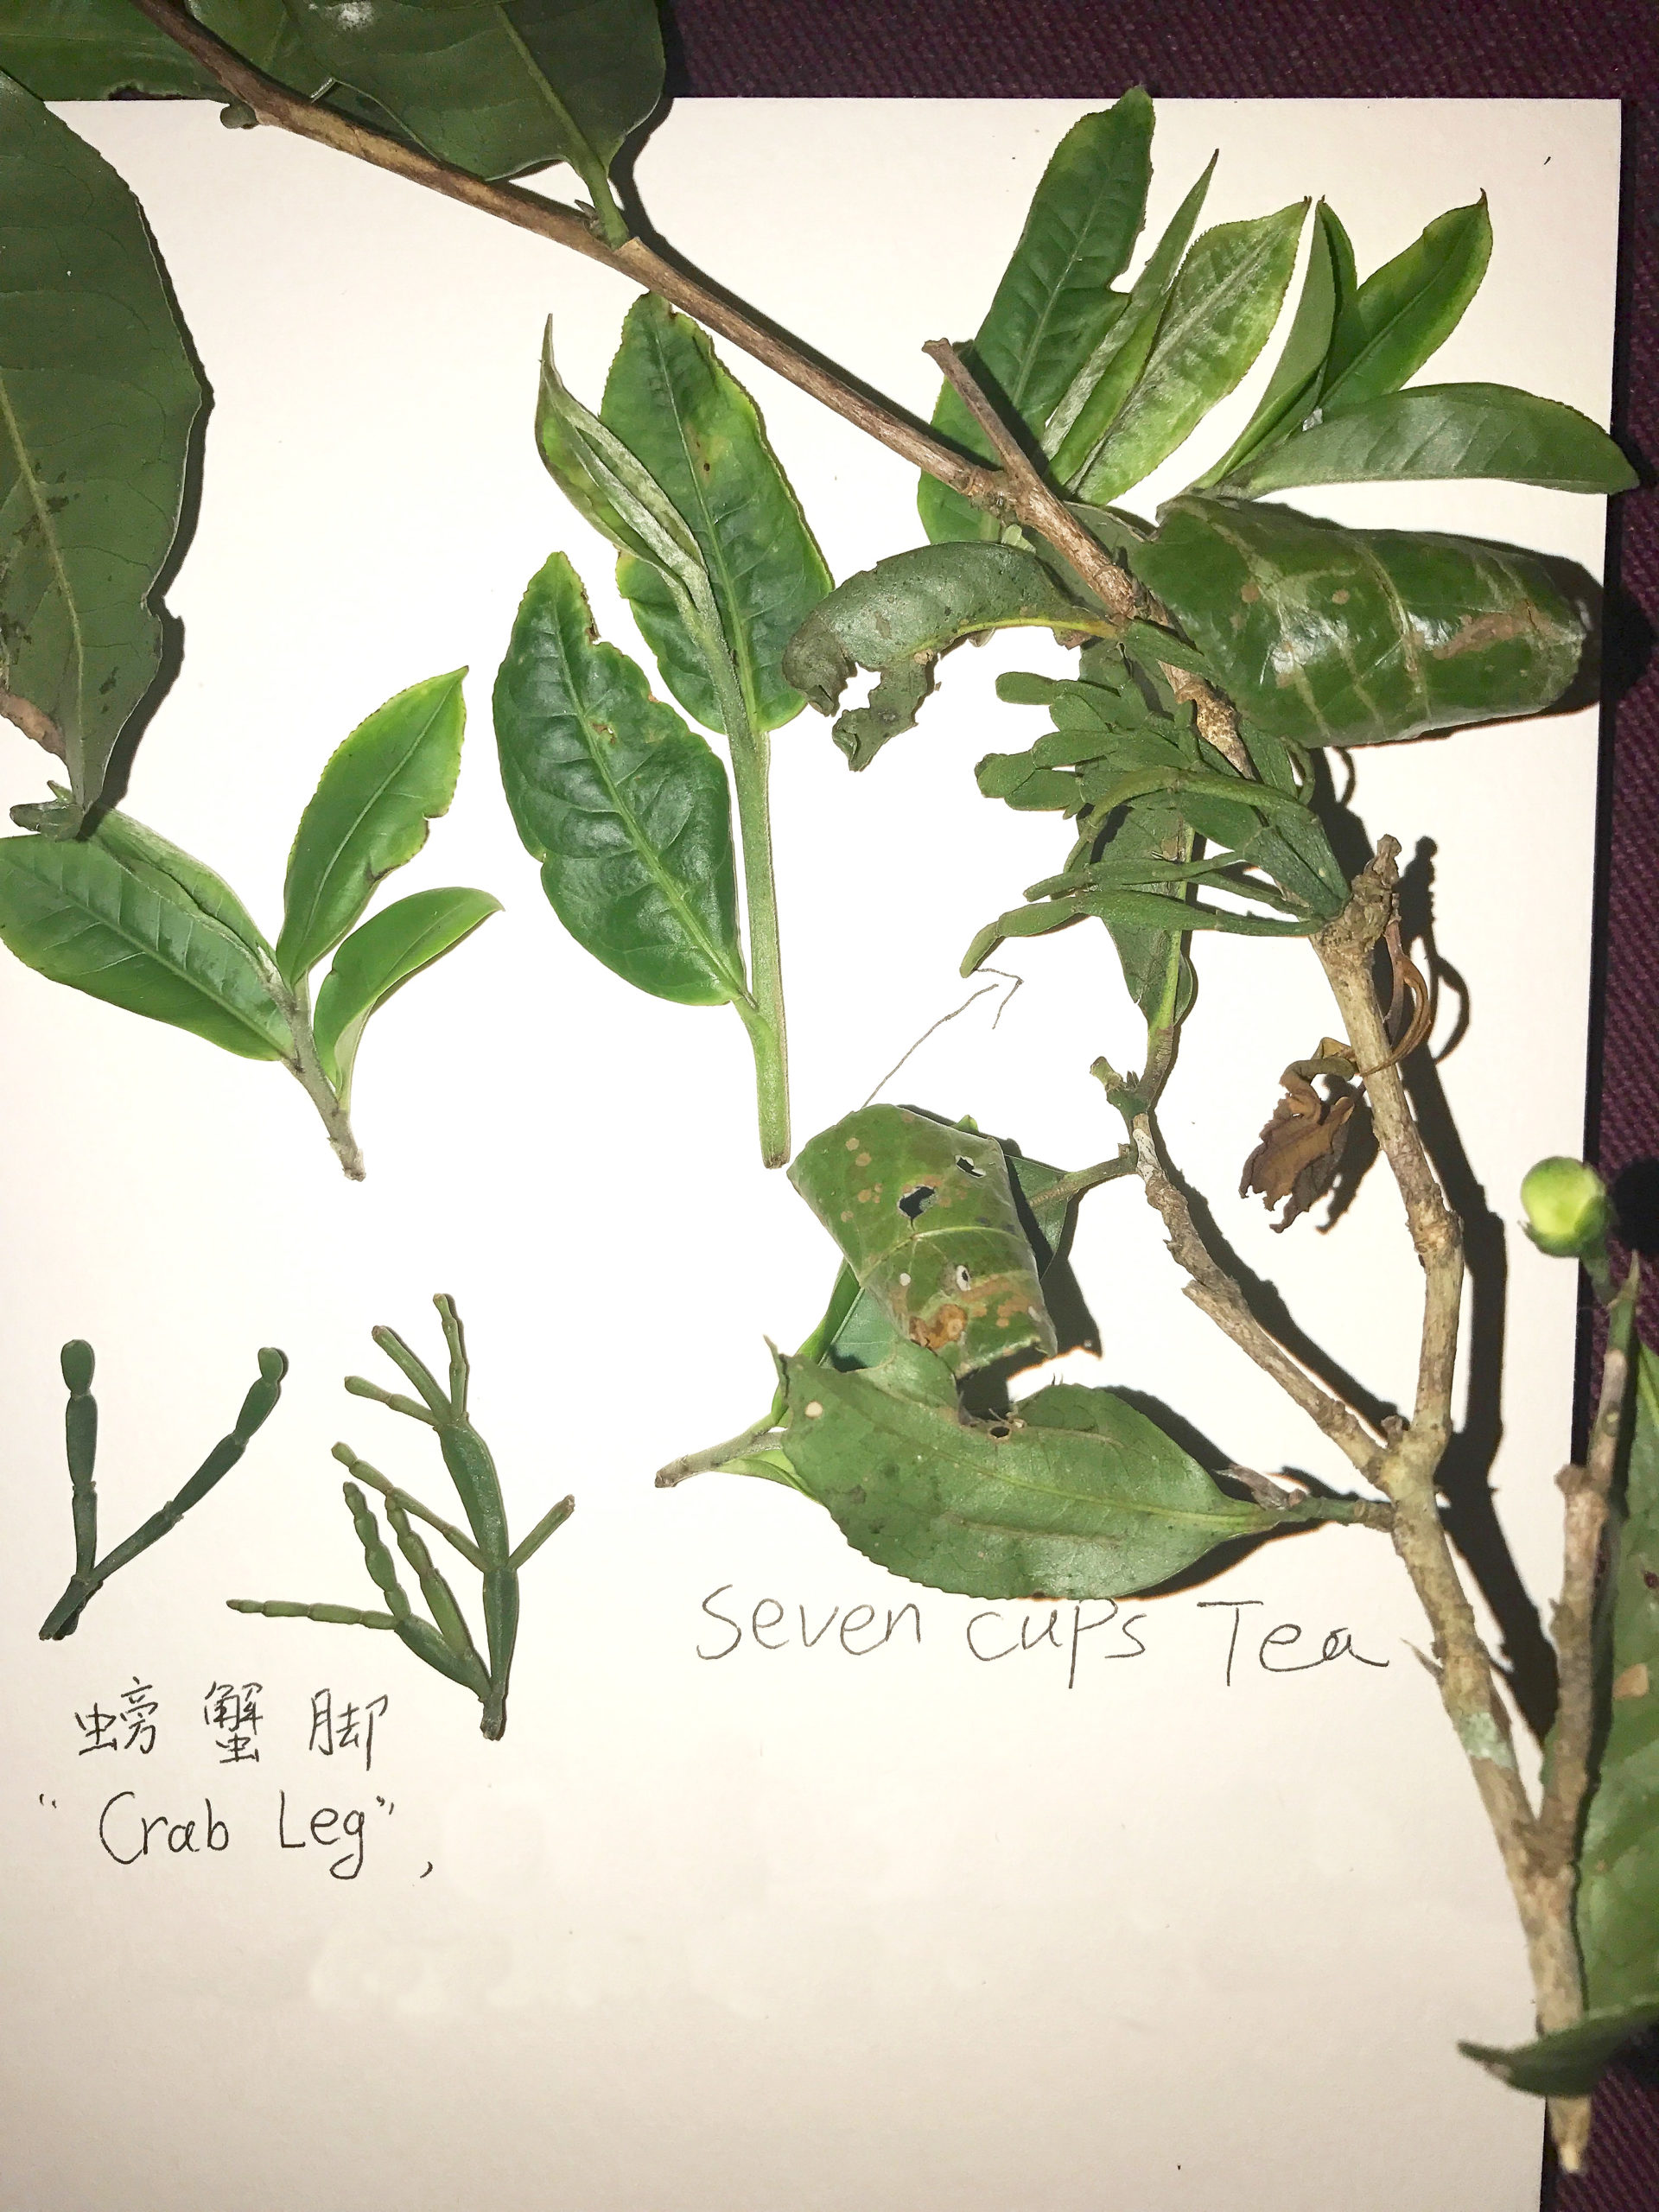 A branch of tea laid out on a white background, showing the small jointed parasitic growths on the stem.